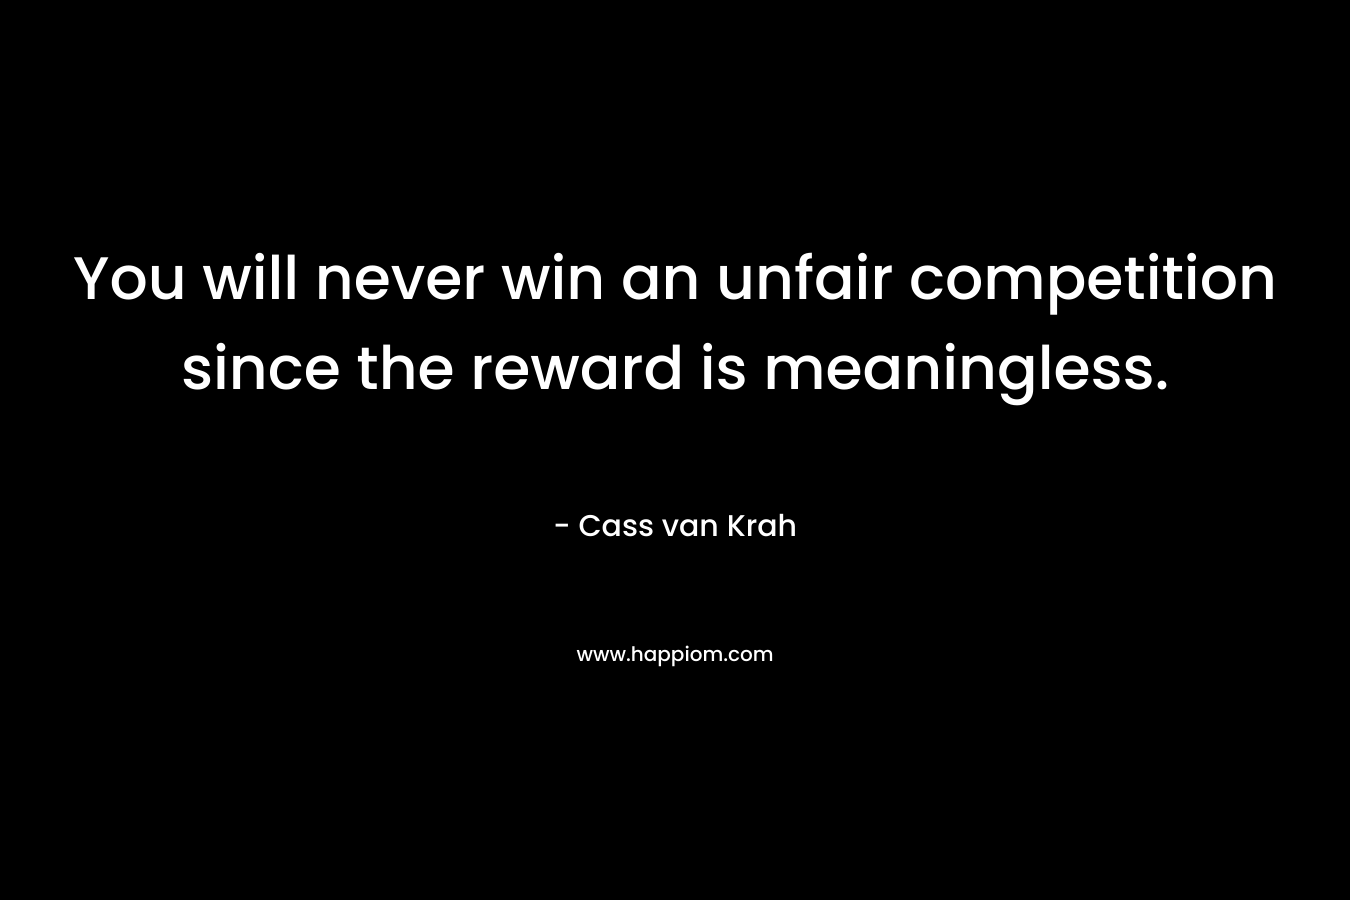 You will never win an unfair competition since the reward is meaningless.